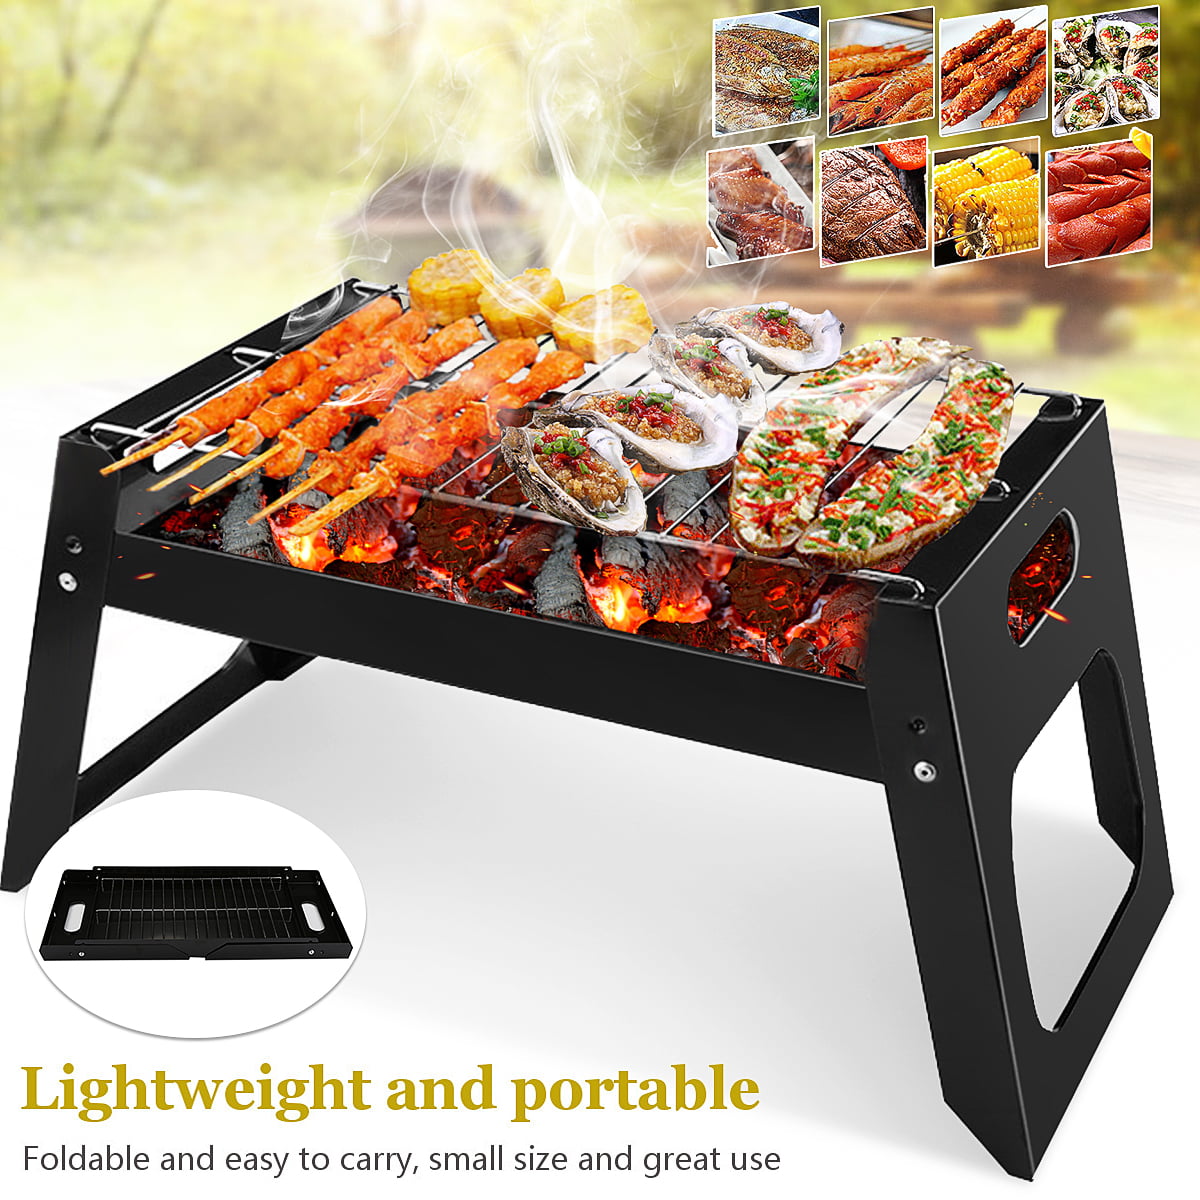 Charcoal BBQ Grill Portable Outdoor Garden Party Barbecue Camping Cooking Stove 